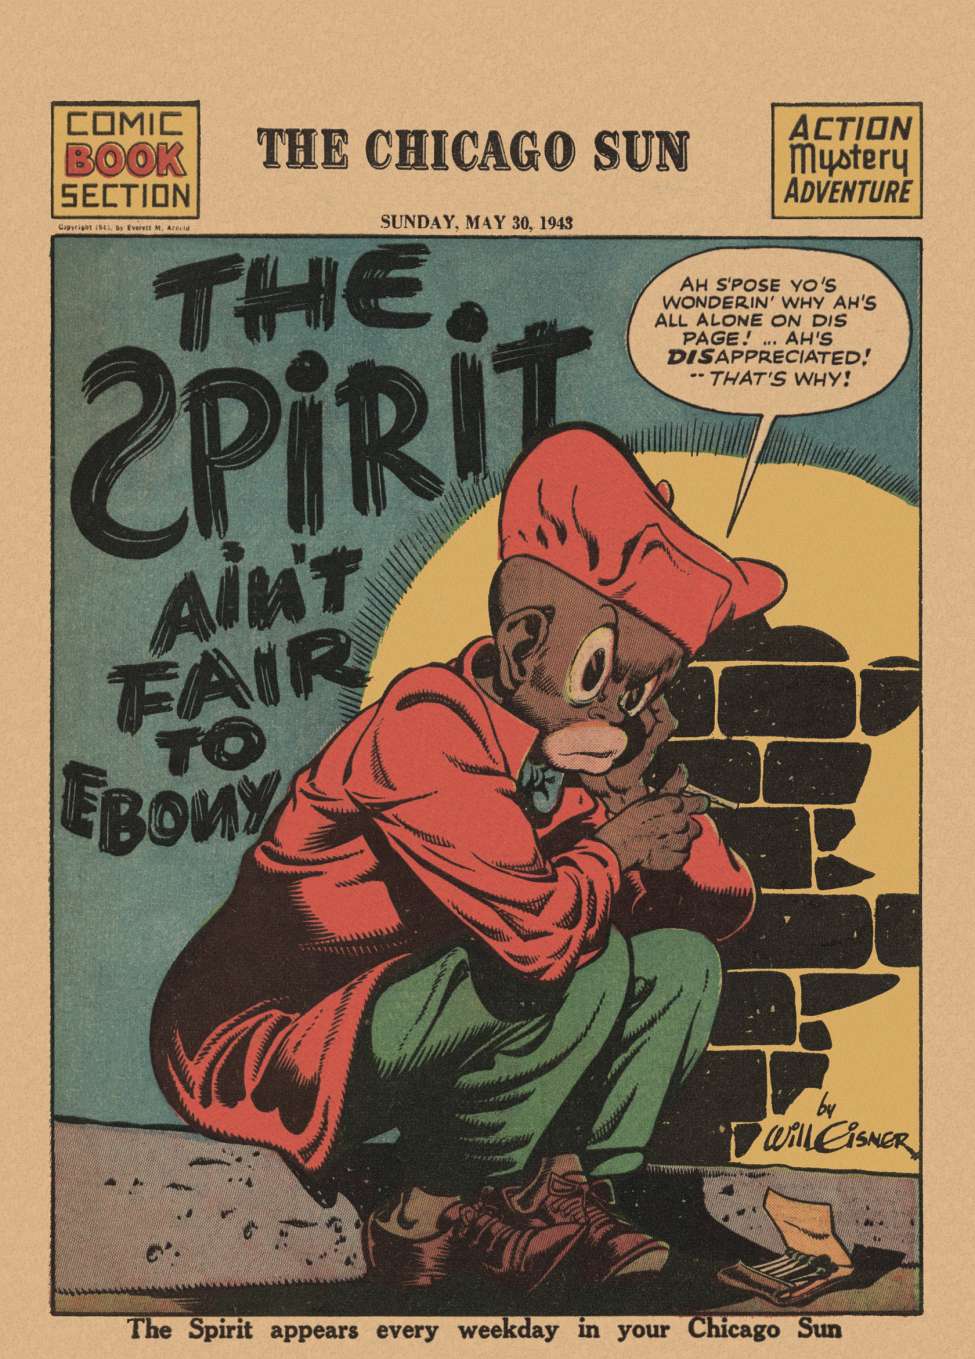 Comic Book Cover For The Spirit (1943-05-30) - Chicago Sun - Version 1